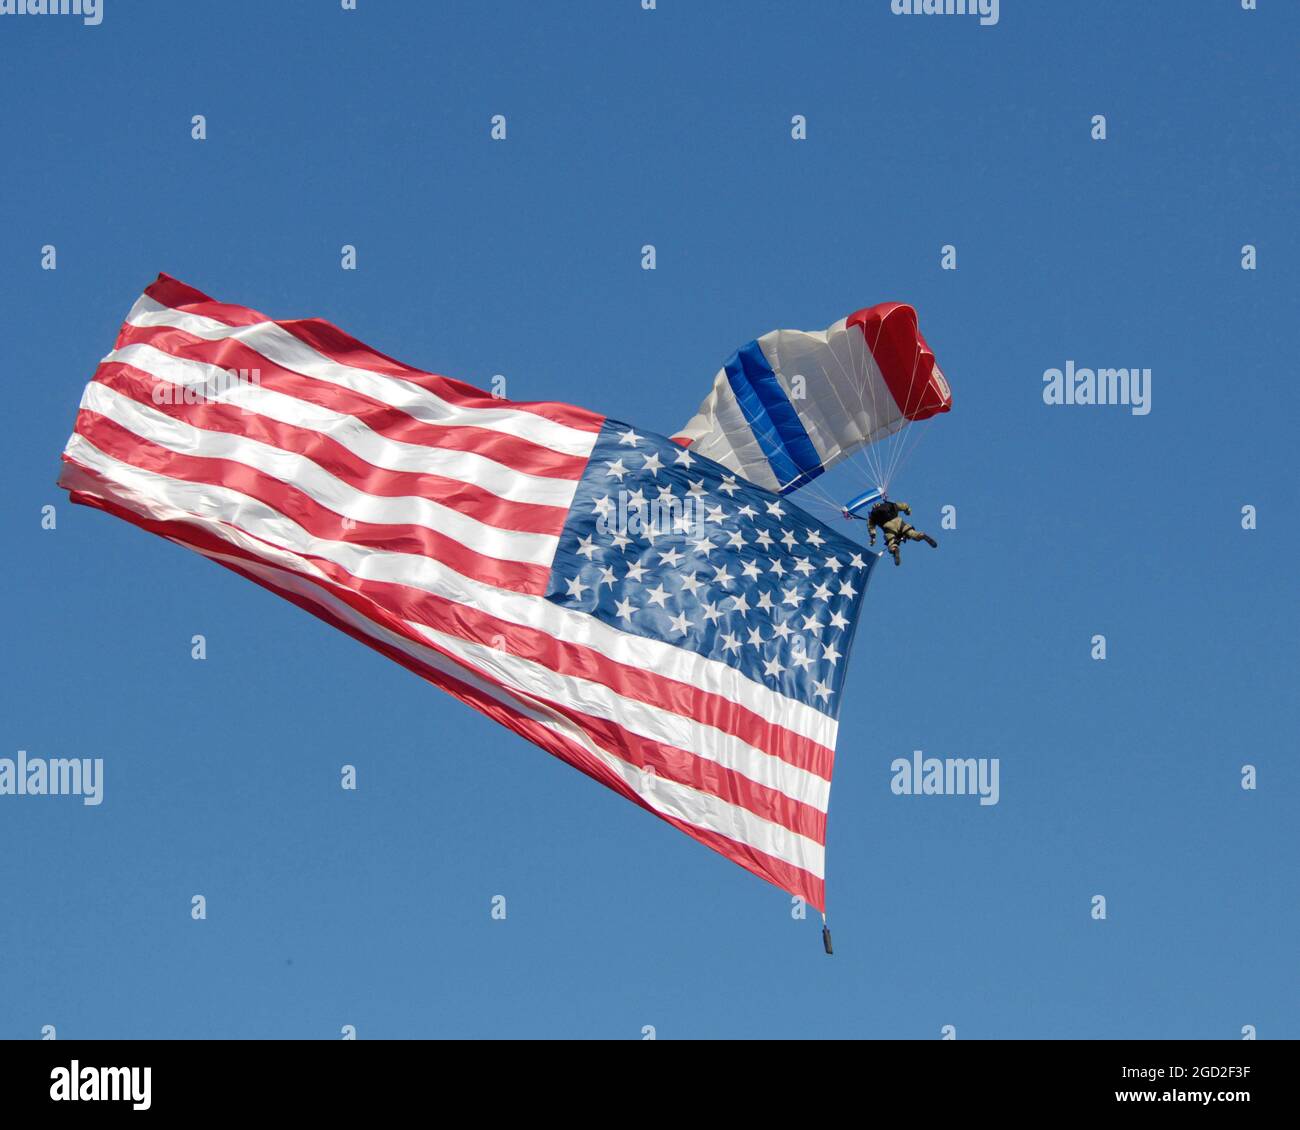 American Flag arrives in style Stock Photo